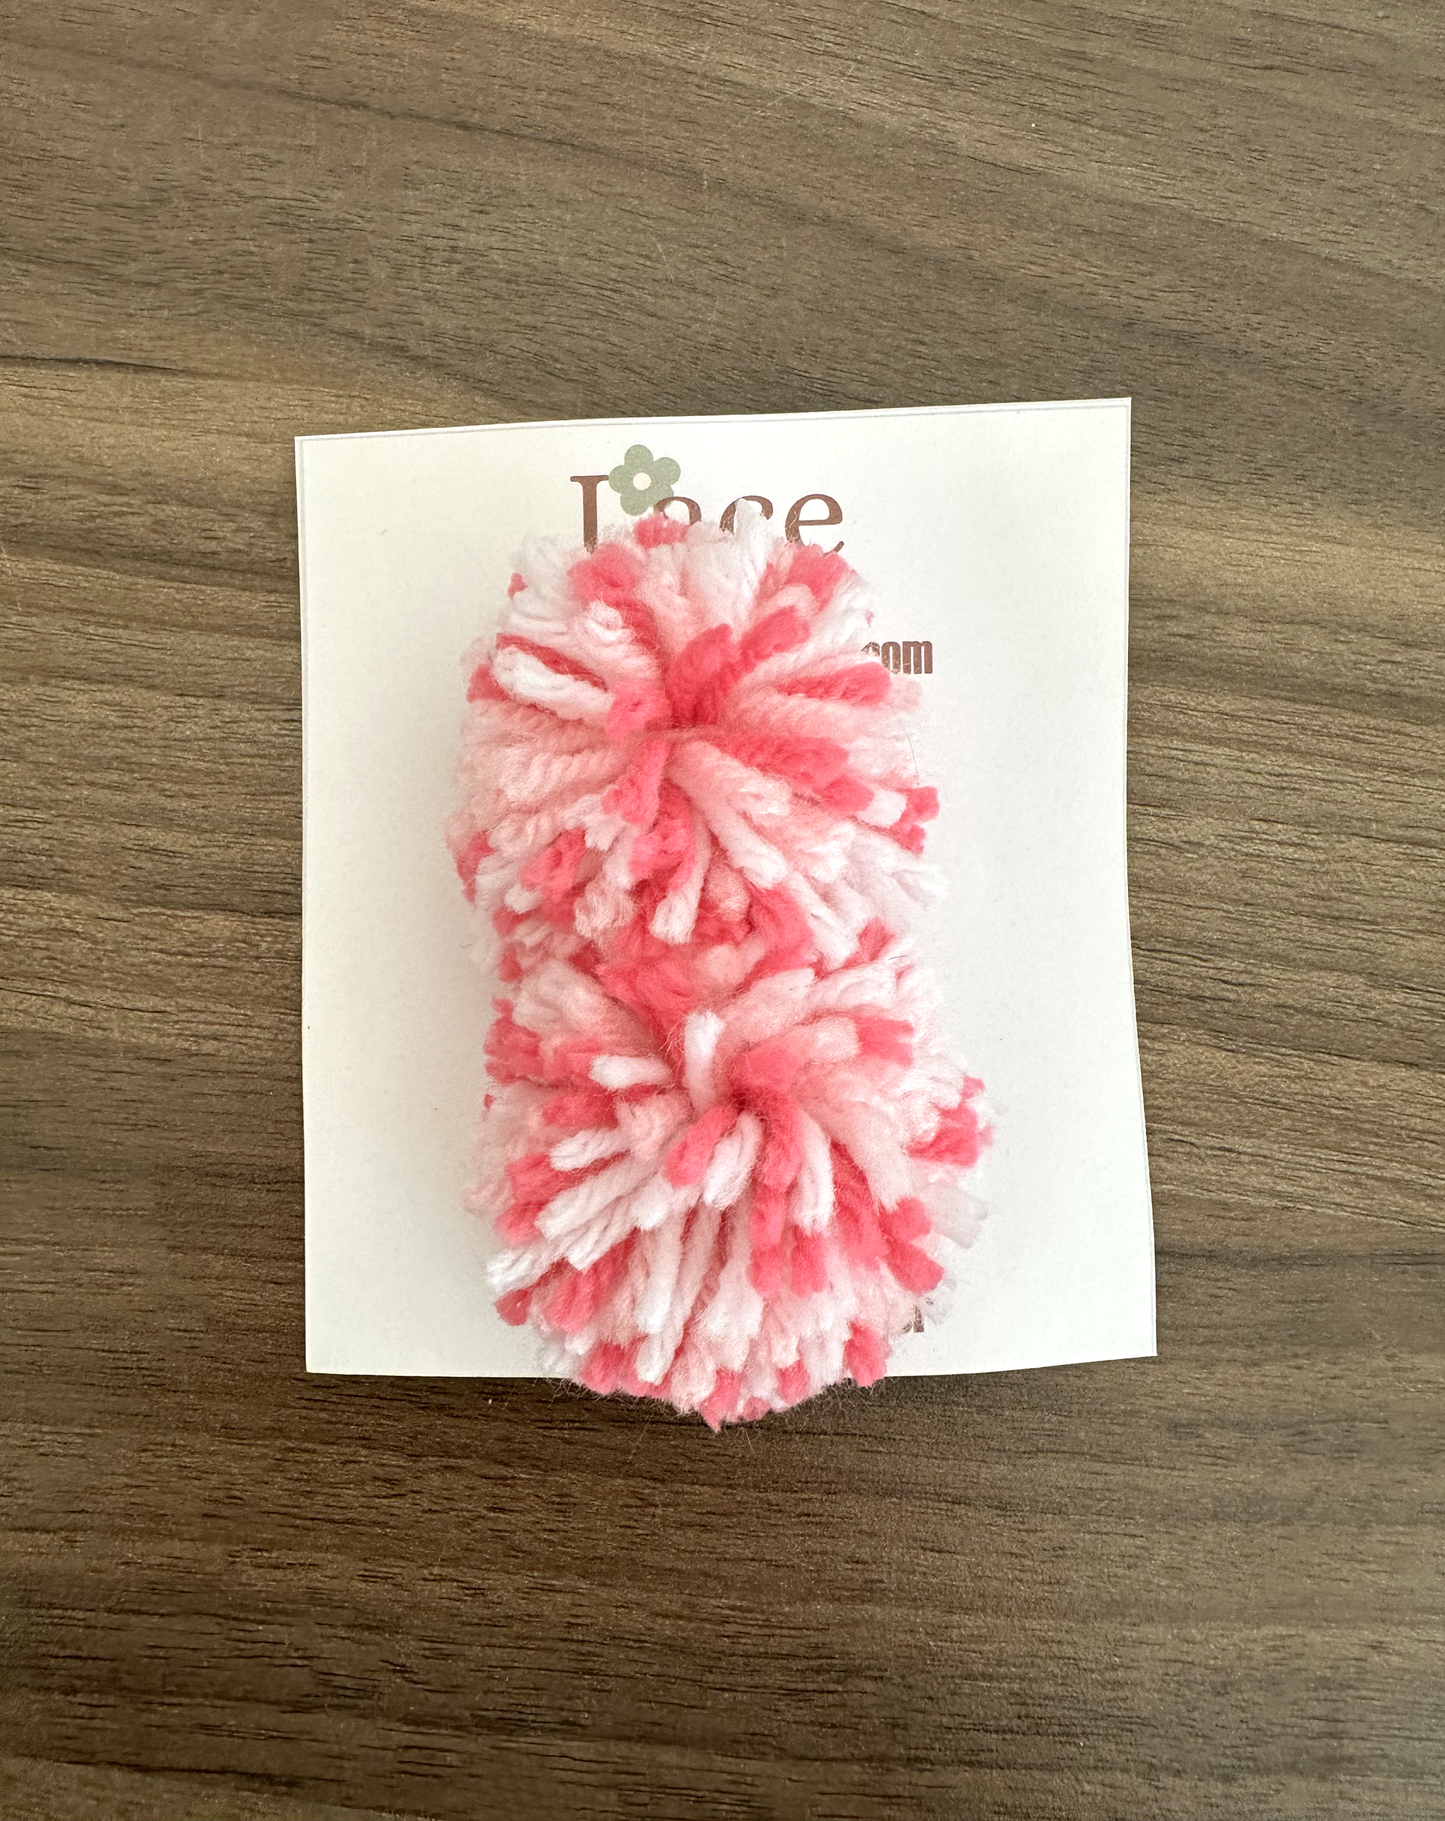 pom pom style girls kids hair clip bows in hot pink and blush pink white